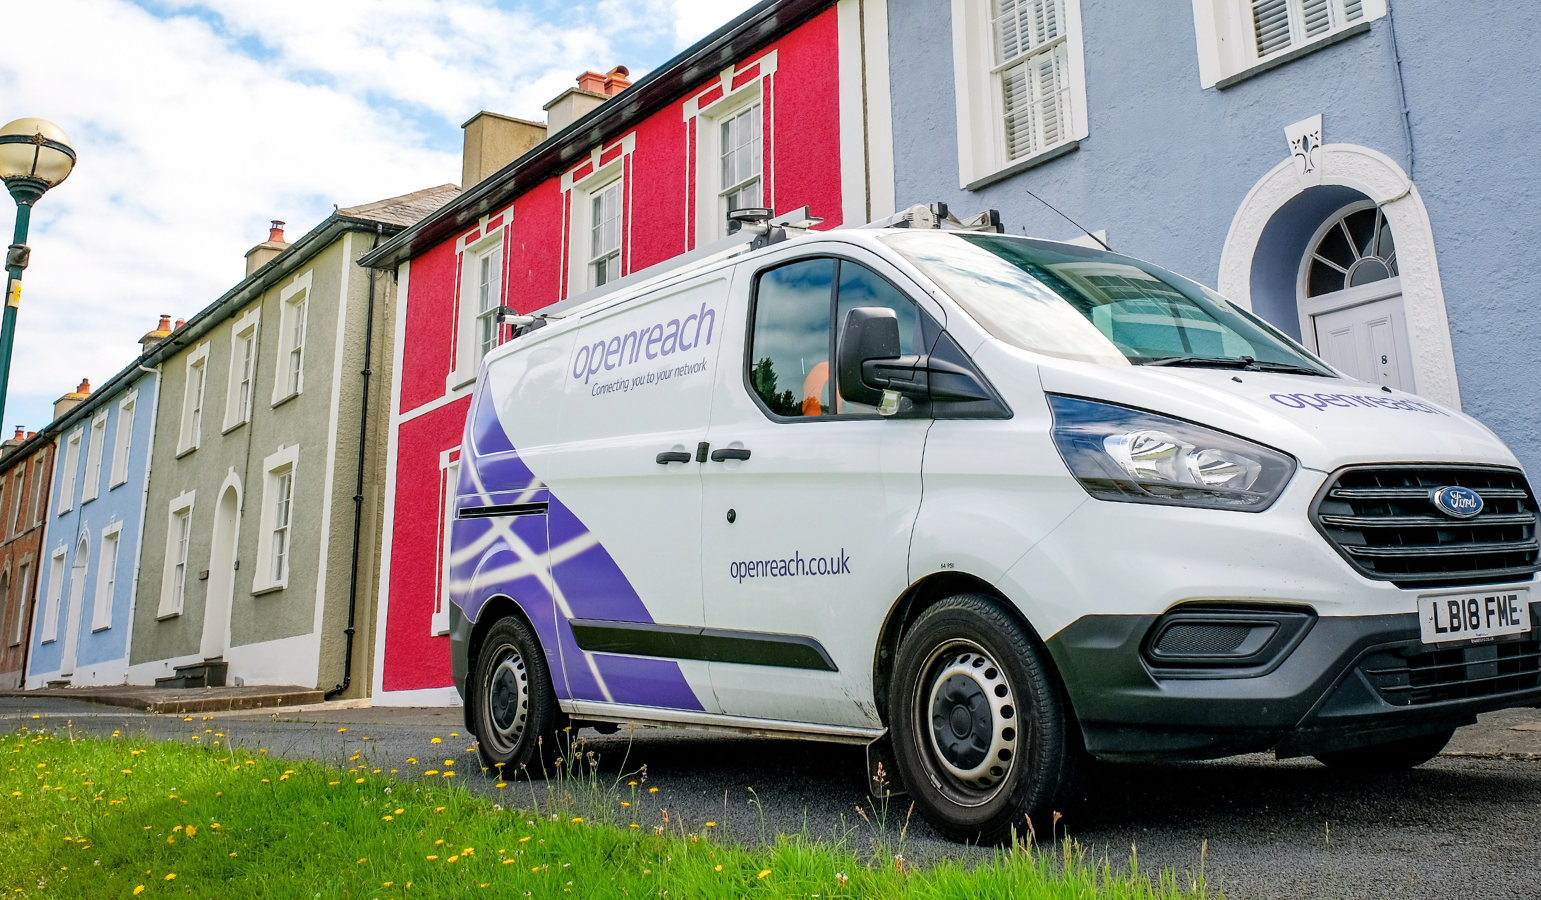 an openreach branded van is pictured parked outside a row of colourful houses 